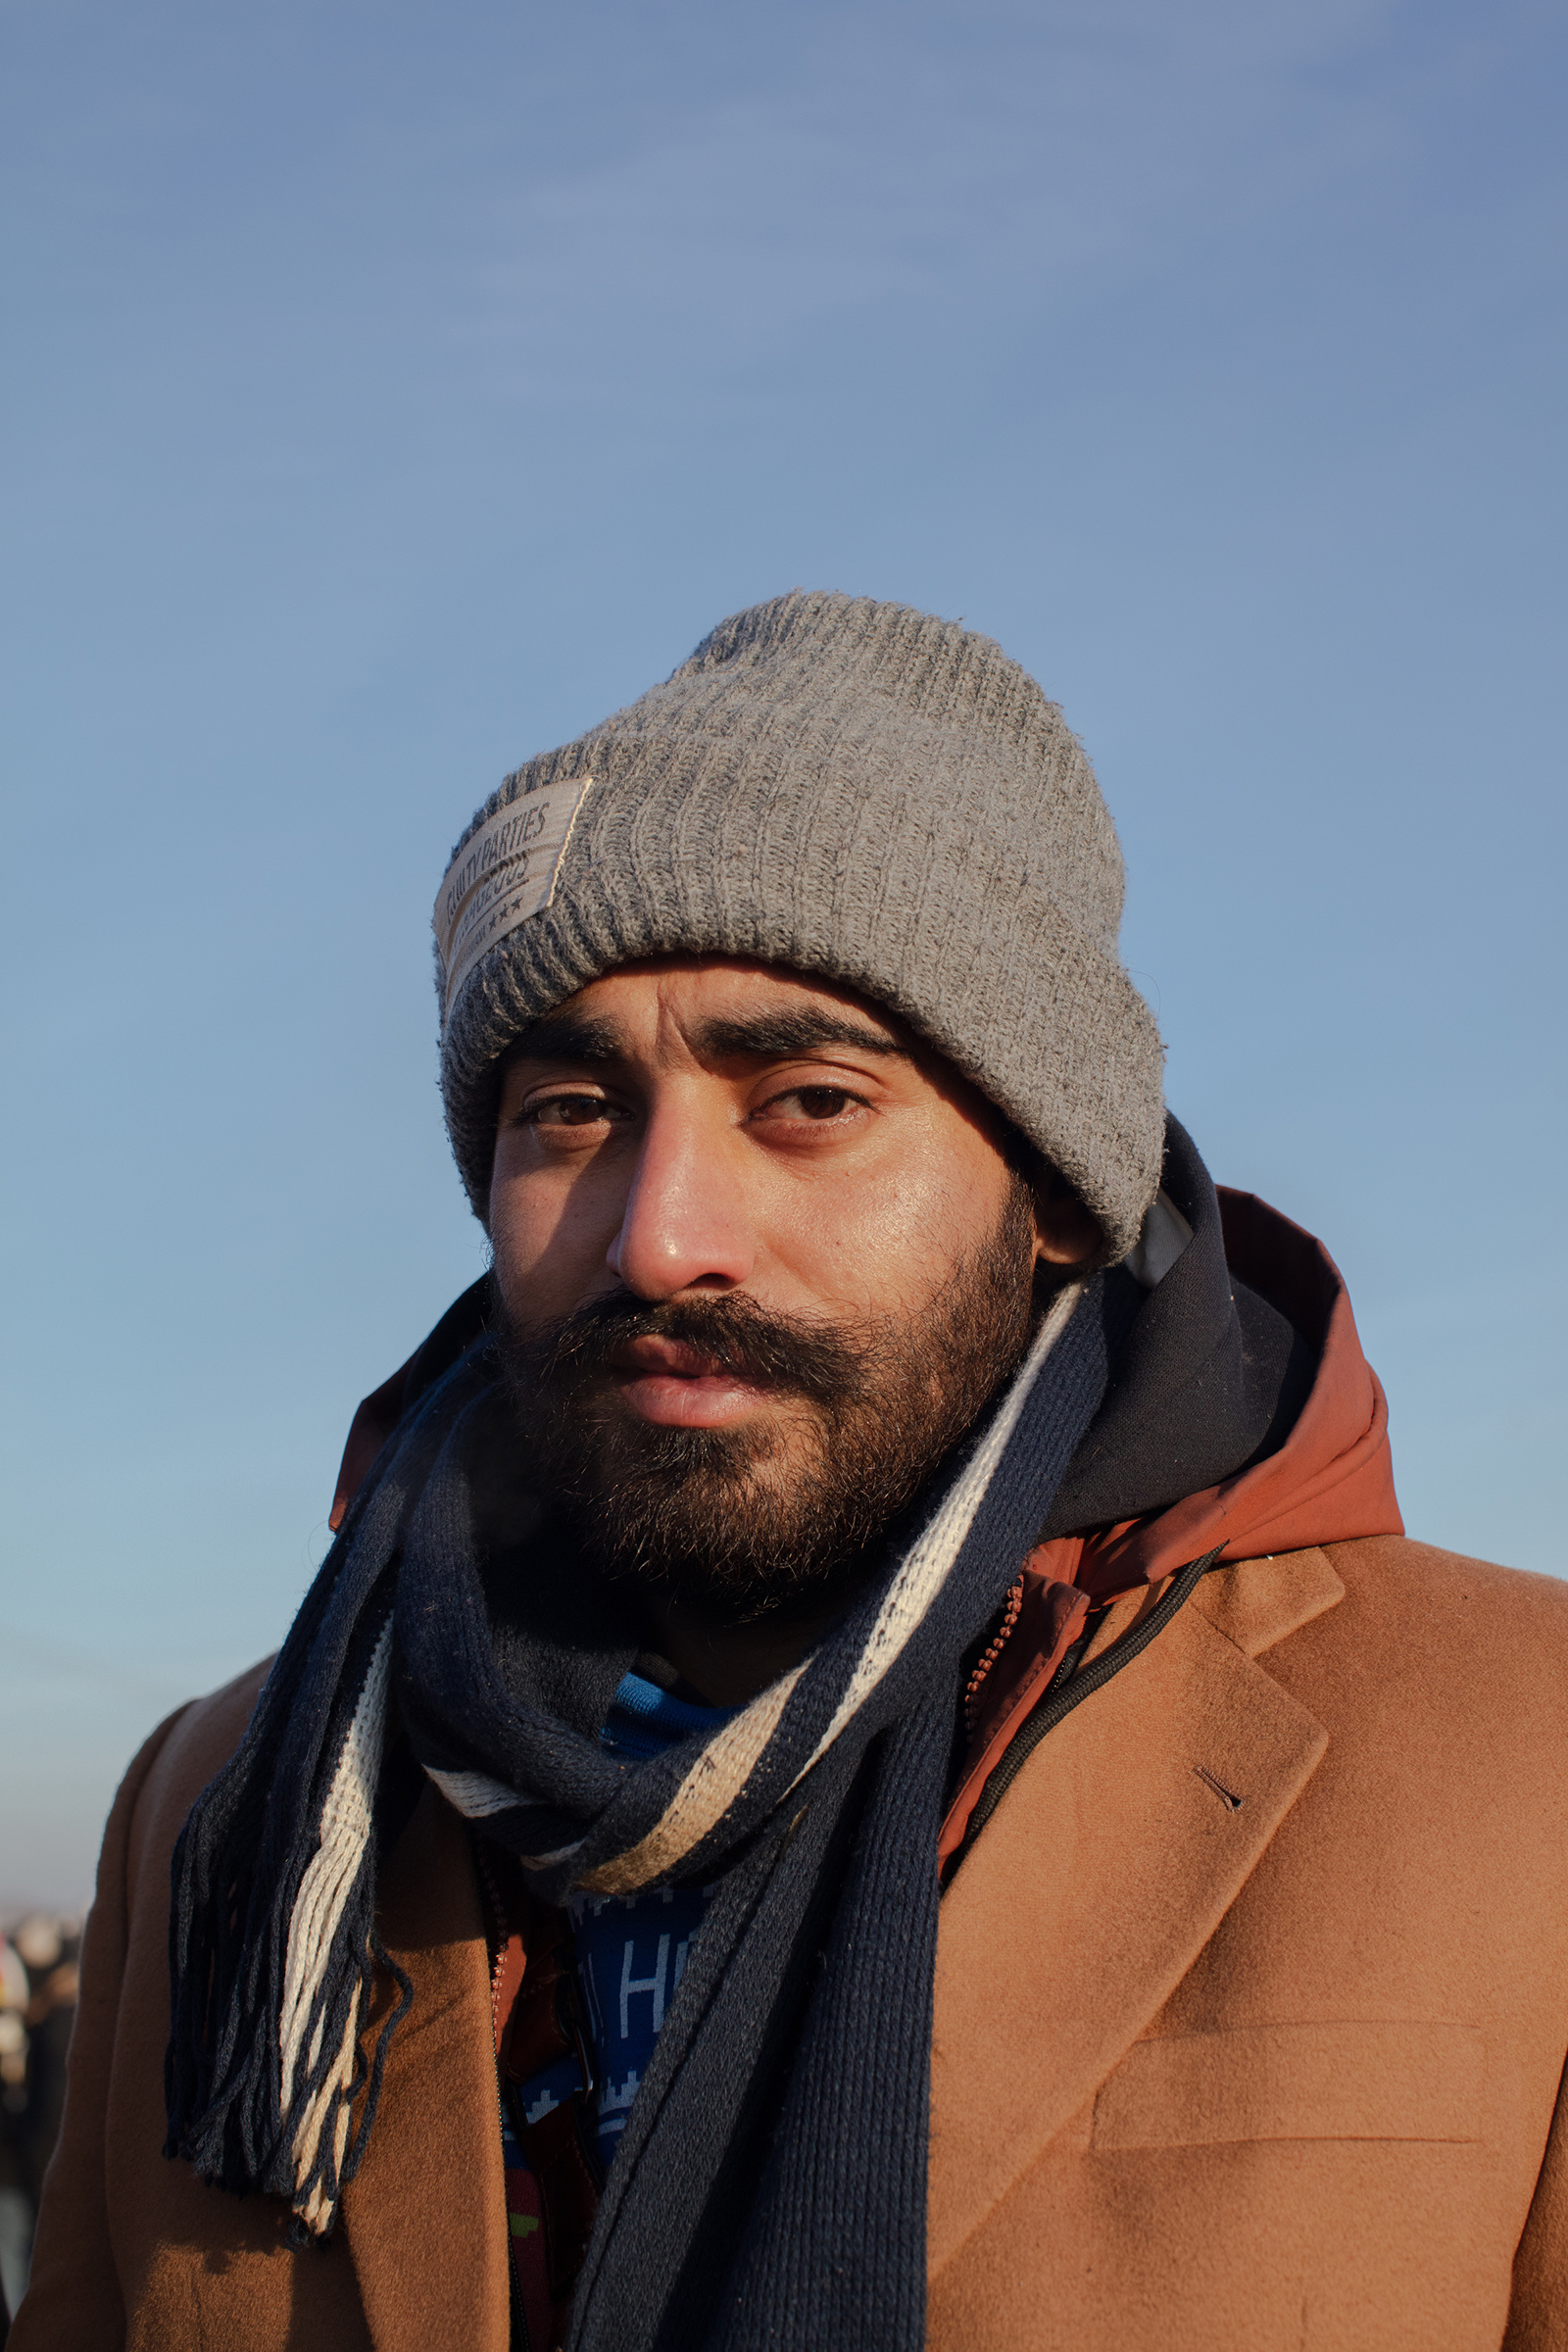 Parvinder Singh from India said he spent three days waiting to cross the border without food, water, or sleep, while white Ukrainians passed through much more quickly (Natalie Keyssar for TIME)